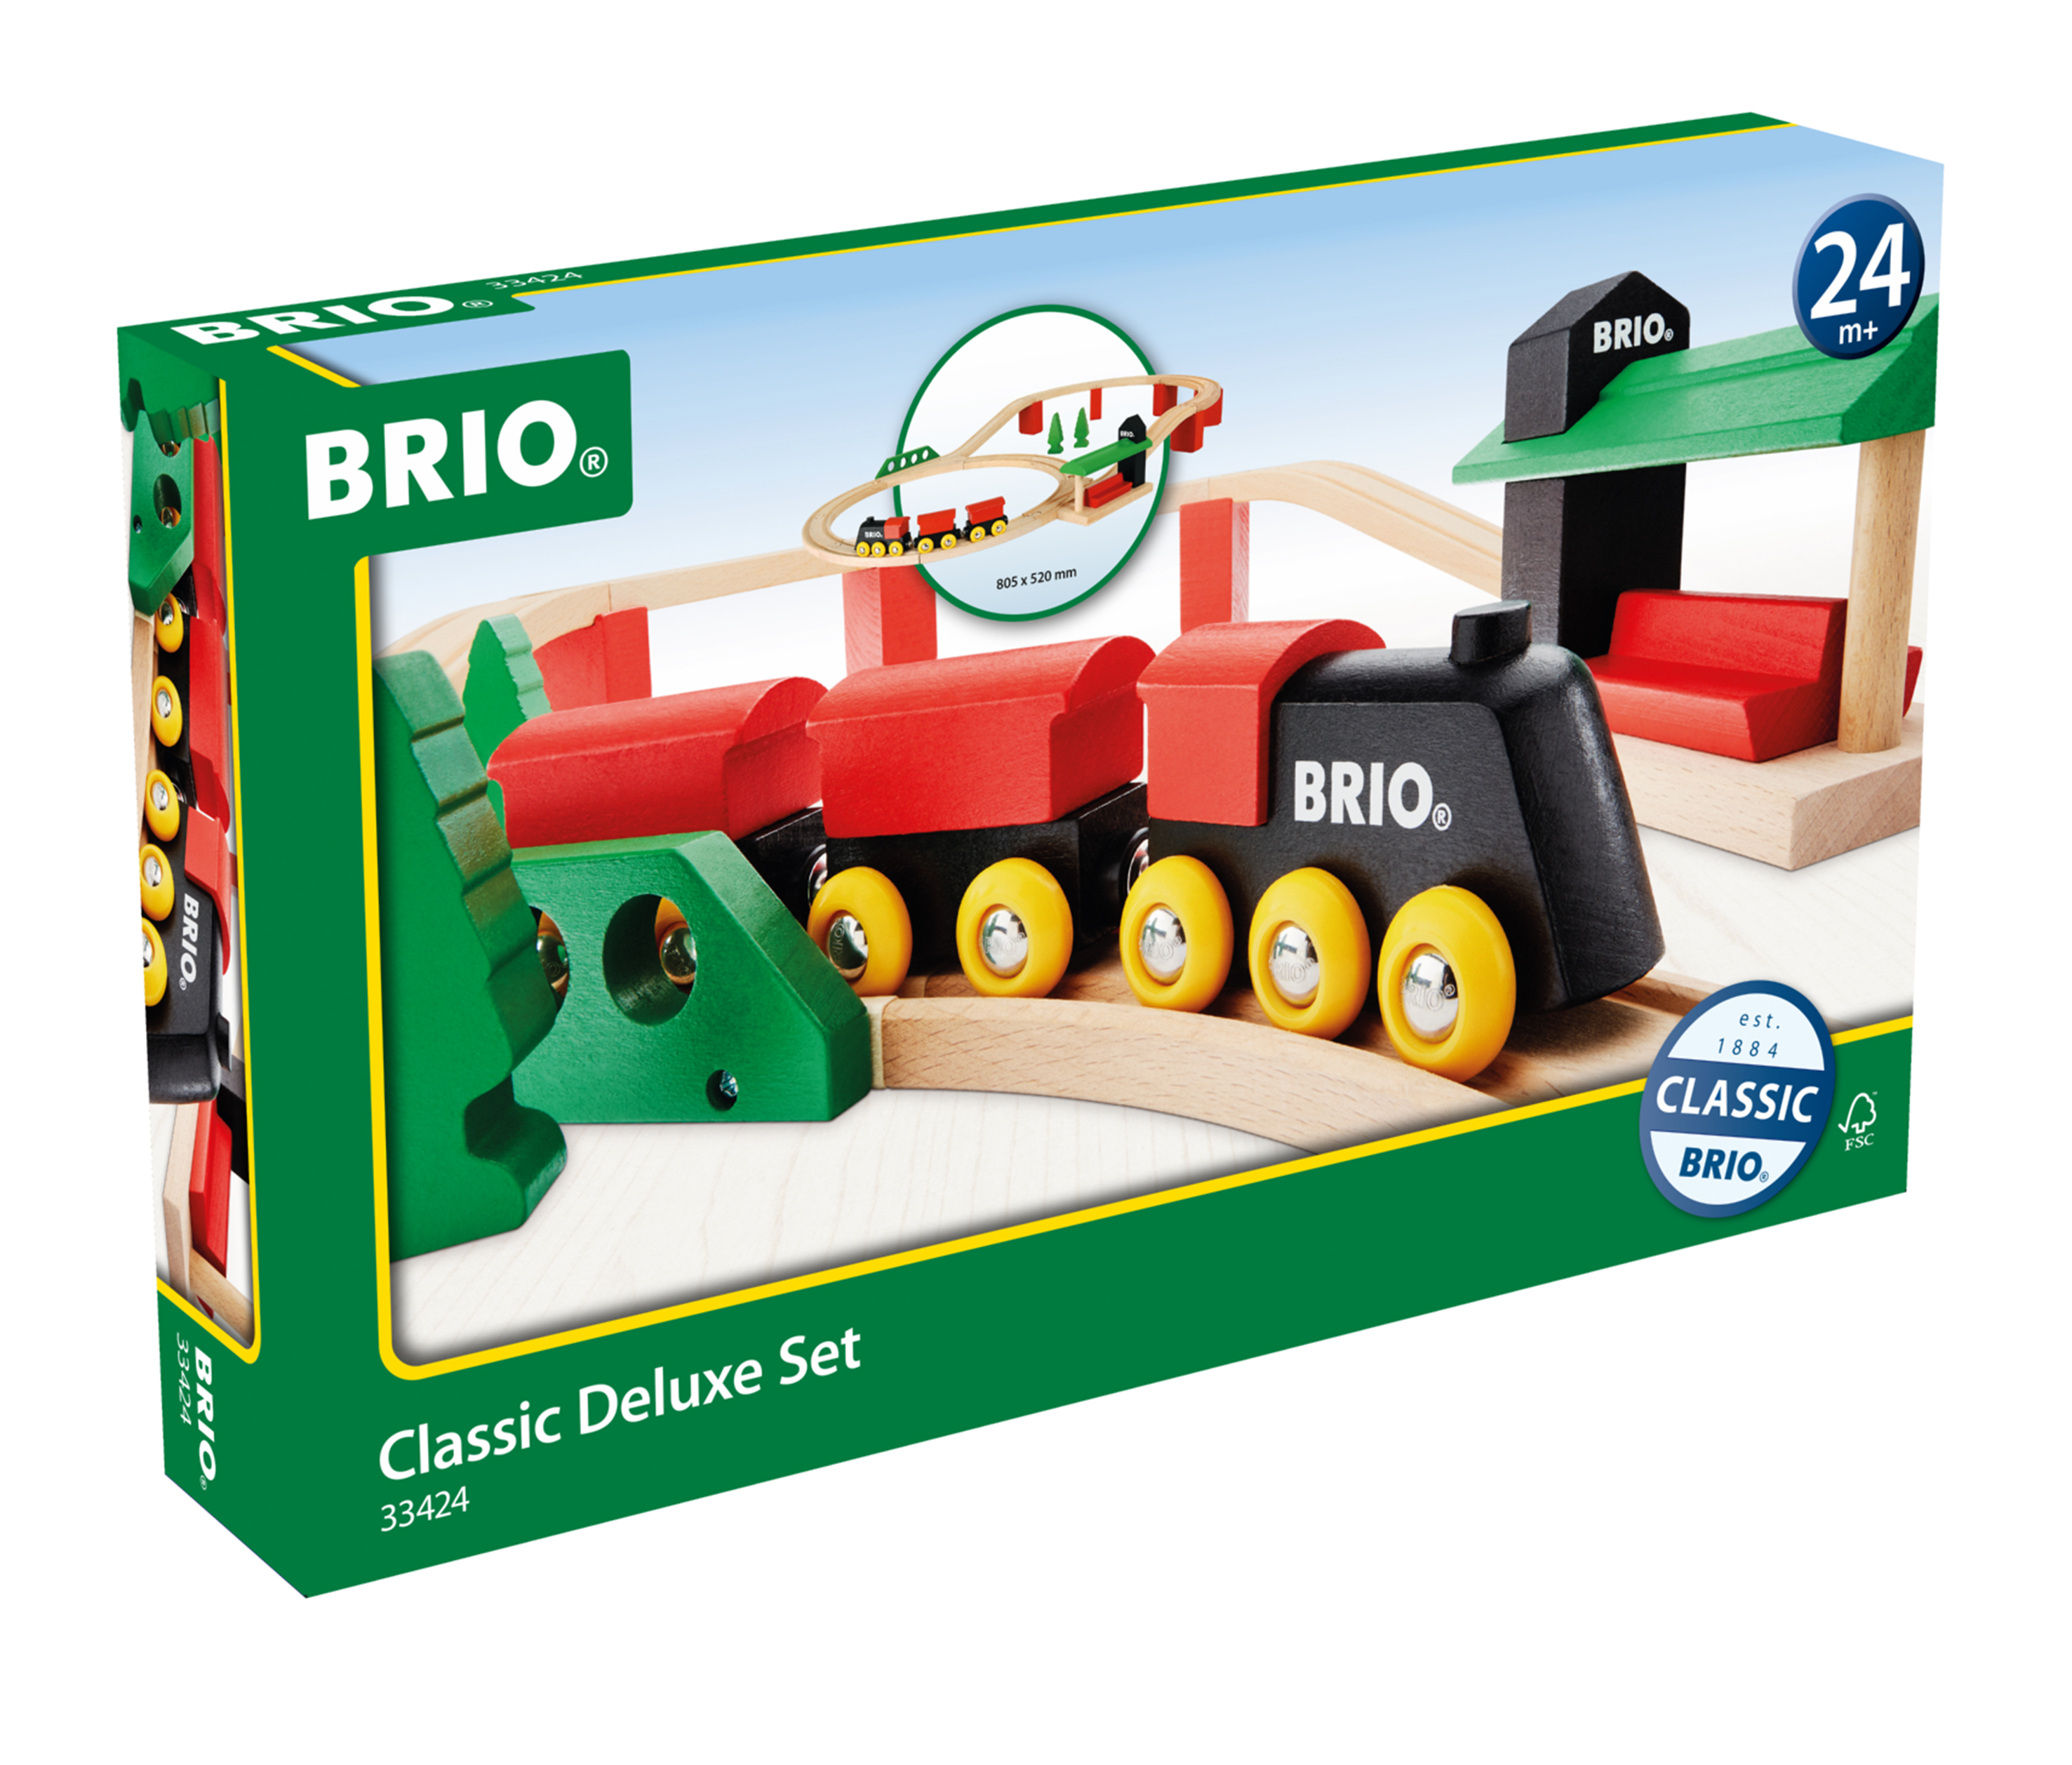 BRIO World Classic Deluxe Wooden Railway Train Set - Ages 2+ - image 3 of 4